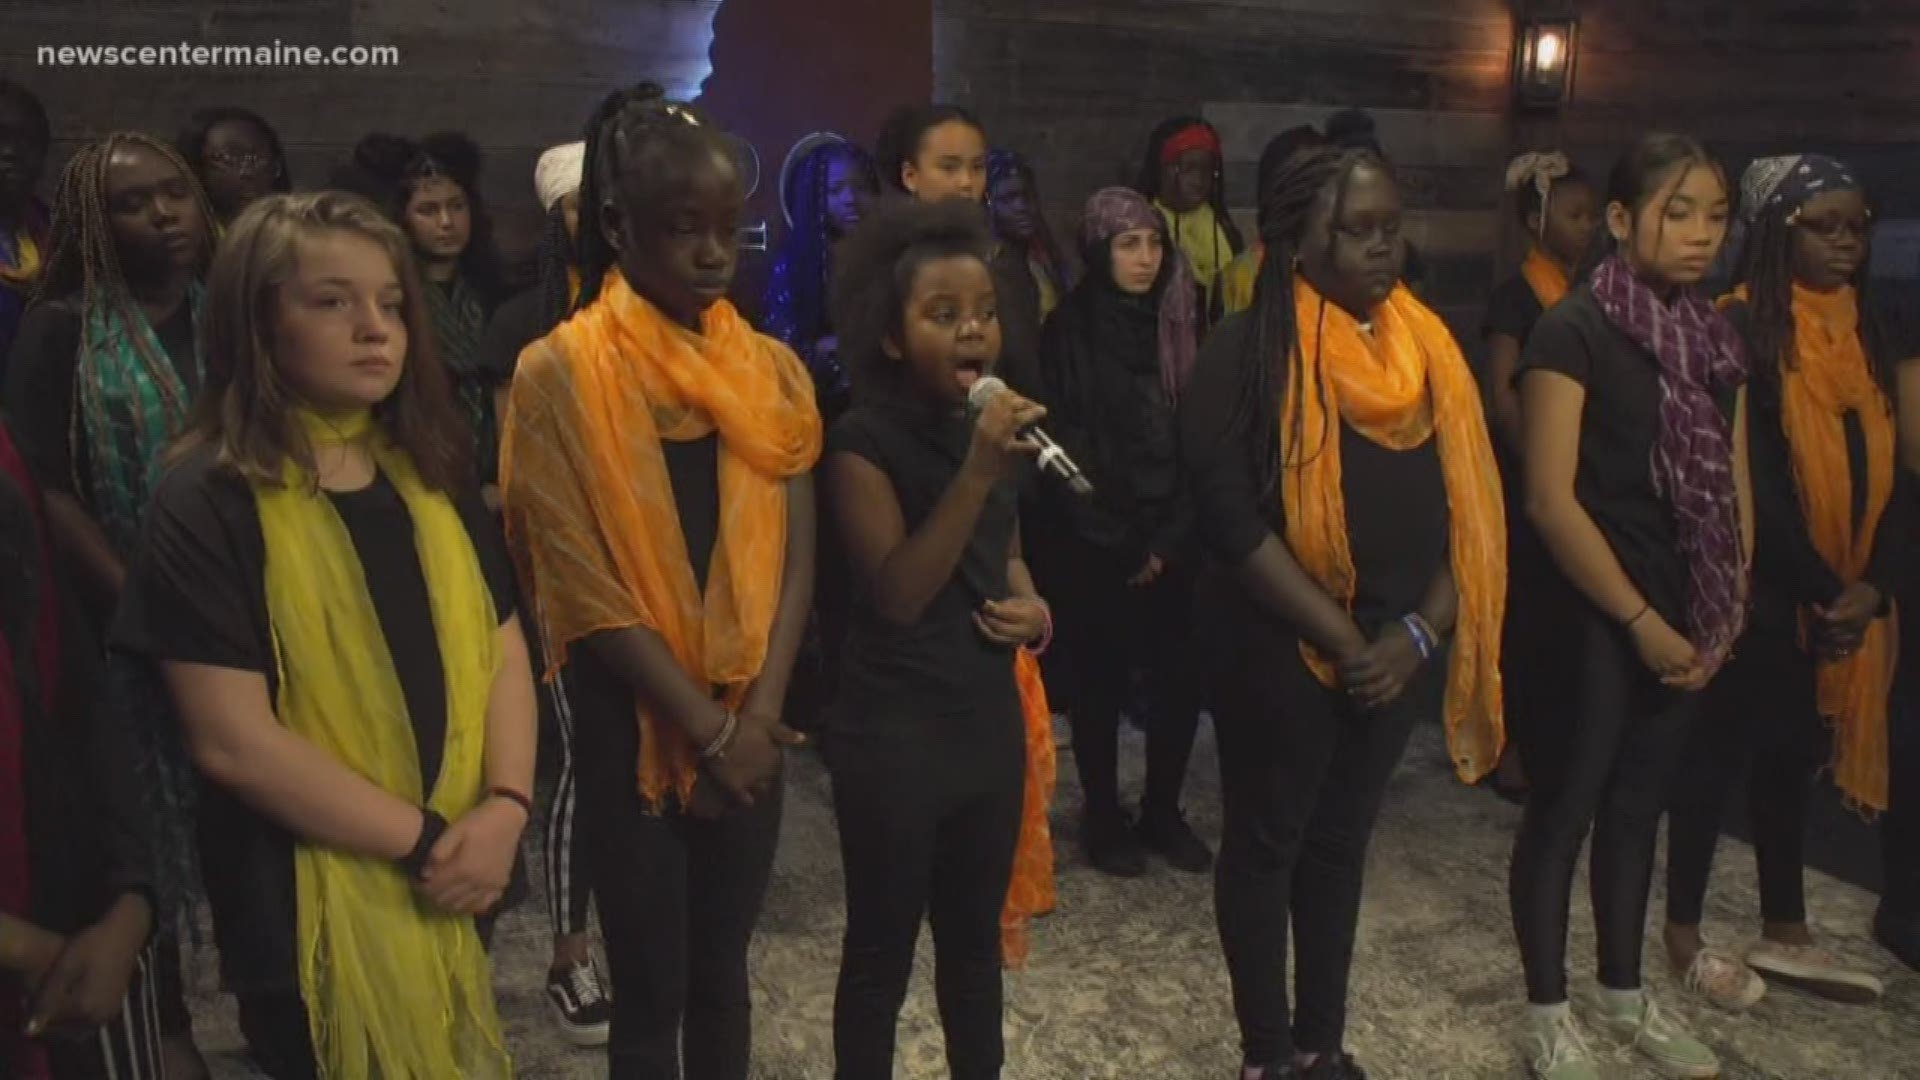 An all-girls choir sings from the heart & reaches all parts of the world.